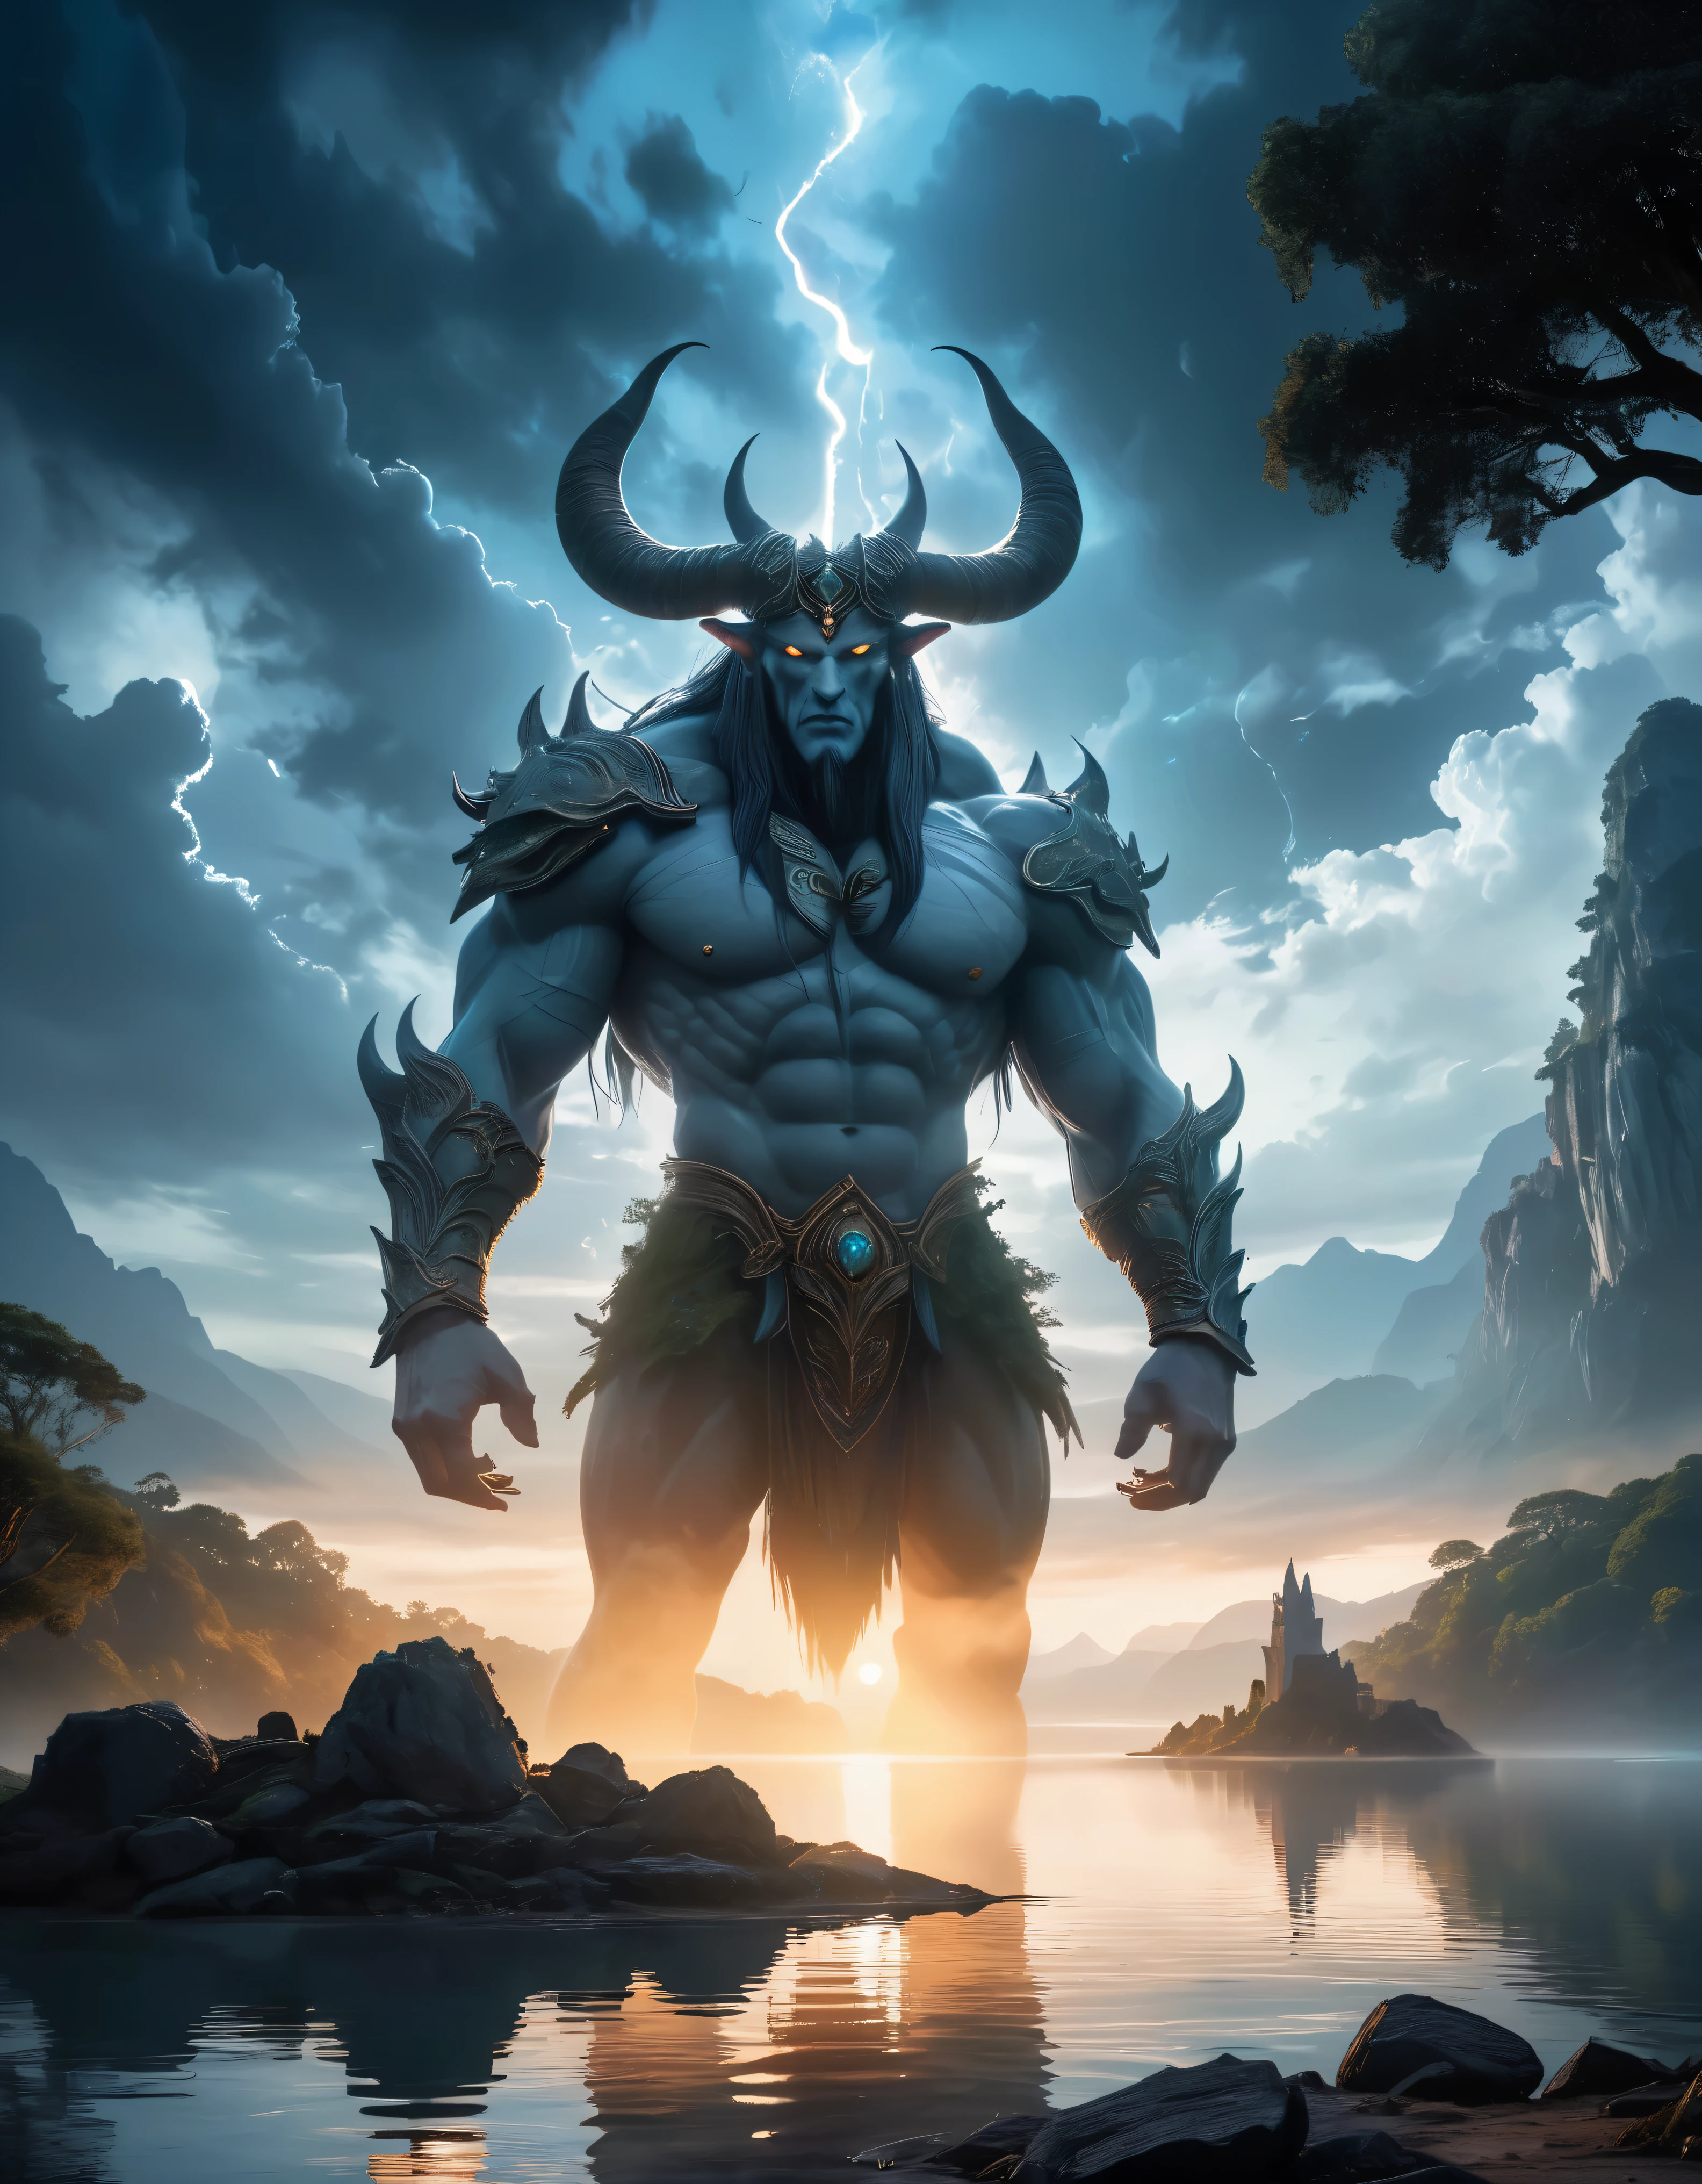 (best quality,4k,highres,masterpiece:1.2),ultra-detailed,realistic:1.37,giant Titan,standing at a lake,mountains,mythical creature,mysterious atmosphere,ancient ruins,enormous size,reflection on the water,towering presence,majestic,awe-inspiring view,fantasy realm,twilight colors,sunlight piercing through clouds,ethereal glow,natural beauty,misty fog,crystal clear water,serene tranquility,ancient trees,mythical creatures in the distance,peaceful silence,magical energy,gentle breeze,imposing figure,majestic horns,granite-like skin,mighty strength,deep wrinkles,wisdom of ages,timeless existence,mythical guardian,dark,ominous clouds,sublime power,illuminated by moonlight,luminous eyes,hidden secrets,distant echoes.